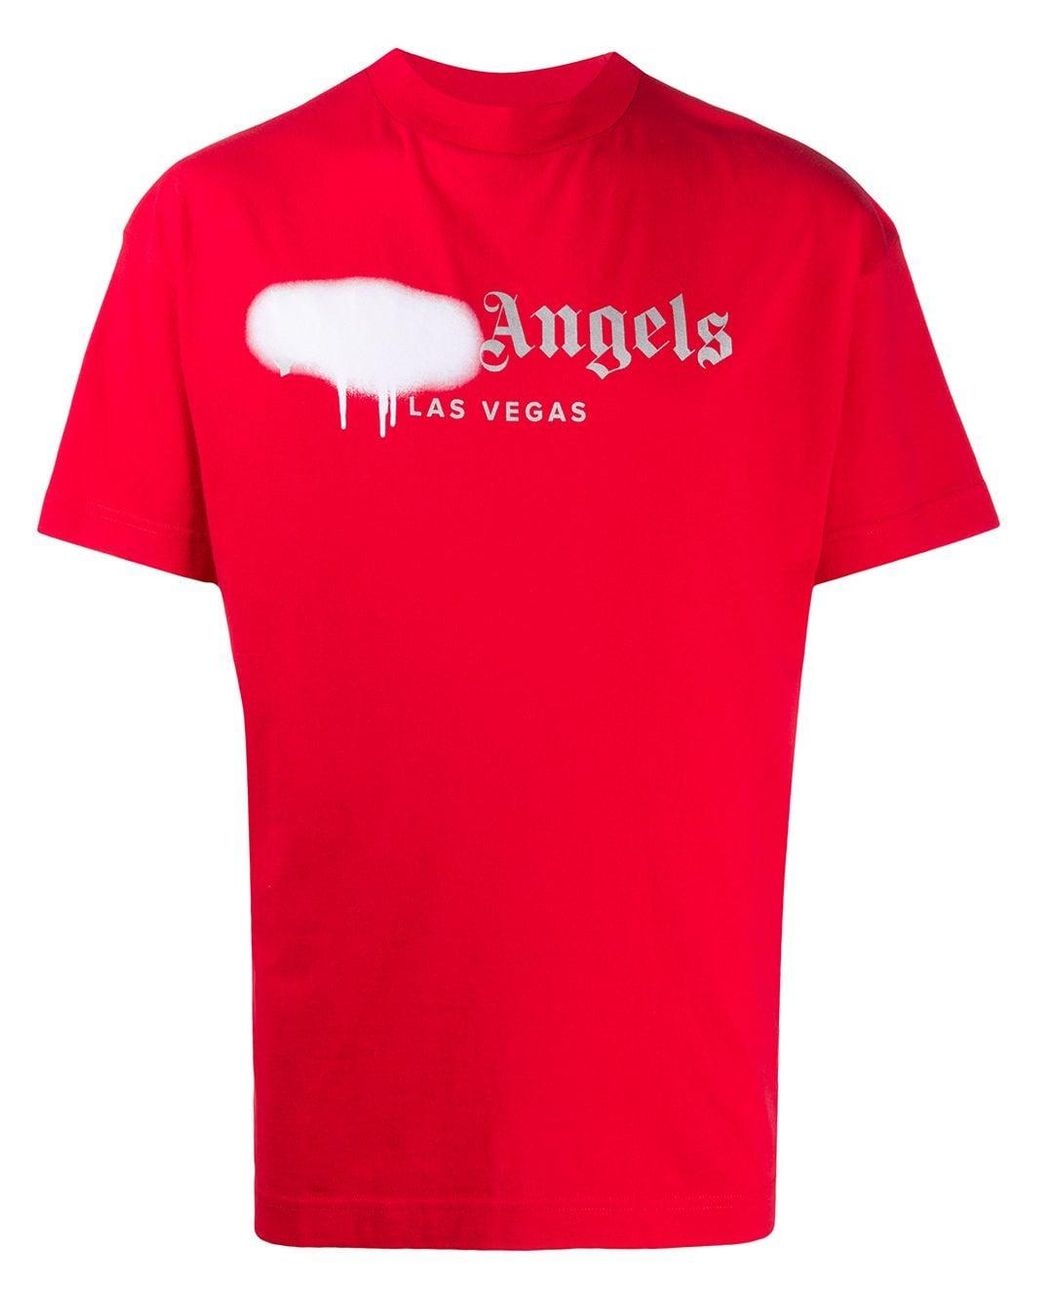 Palm Angels Cotton Las Vegas Logo-print T-shirt in Red for Men - Lyst